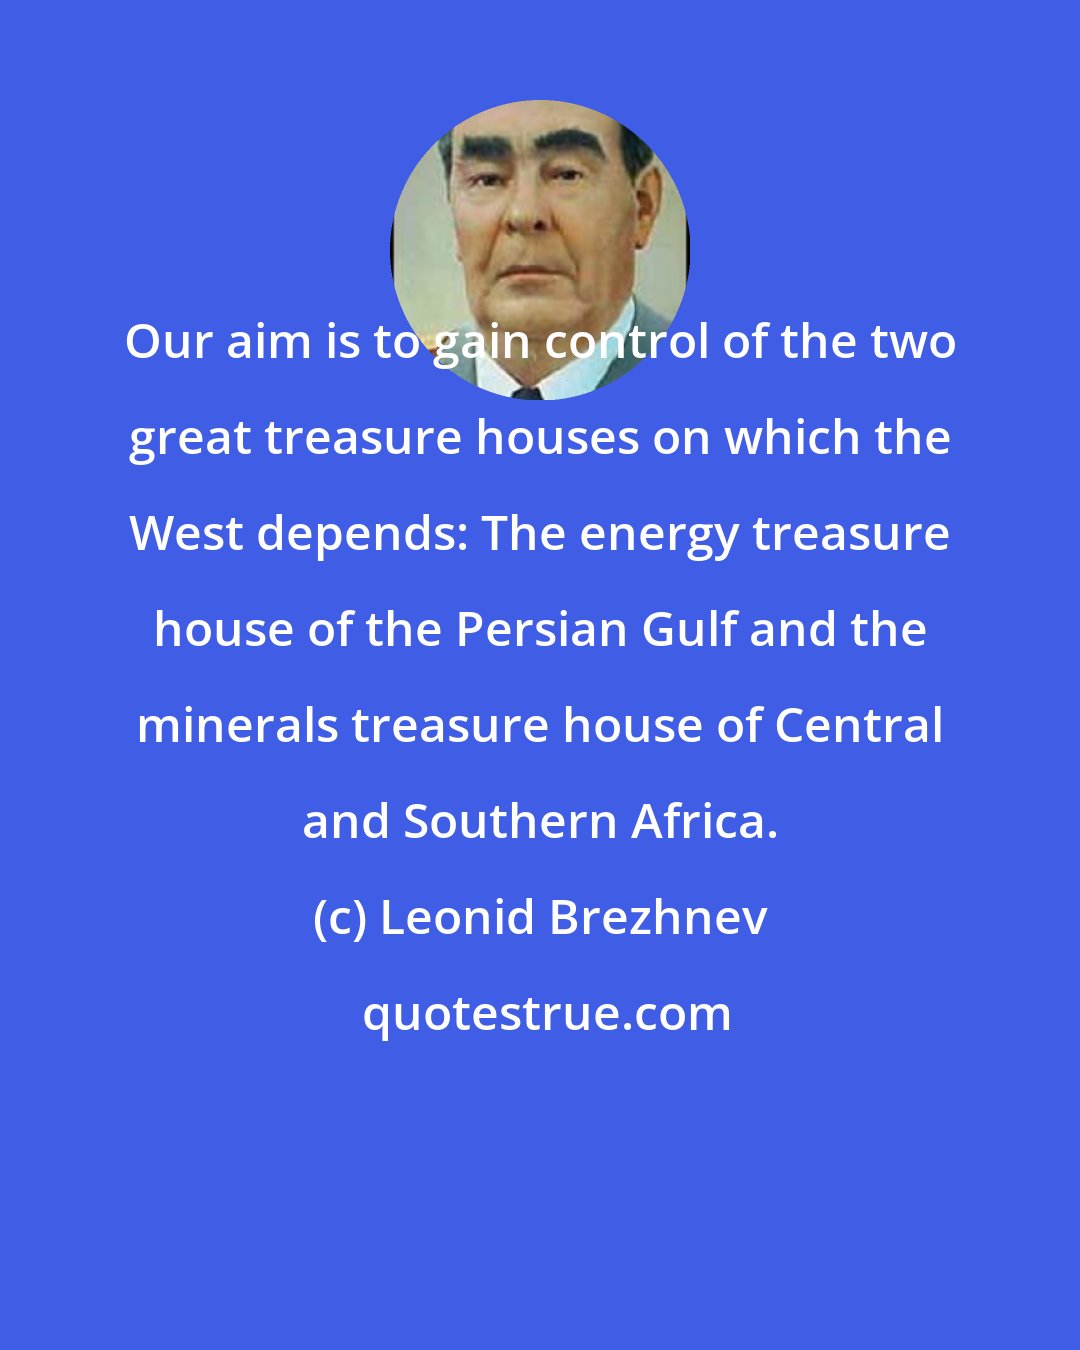 Leonid Brezhnev: Our aim is to gain control of the two great treasure houses on which the West depends: The energy treasure house of the Persian Gulf and the minerals treasure house of Central and Southern Africa.